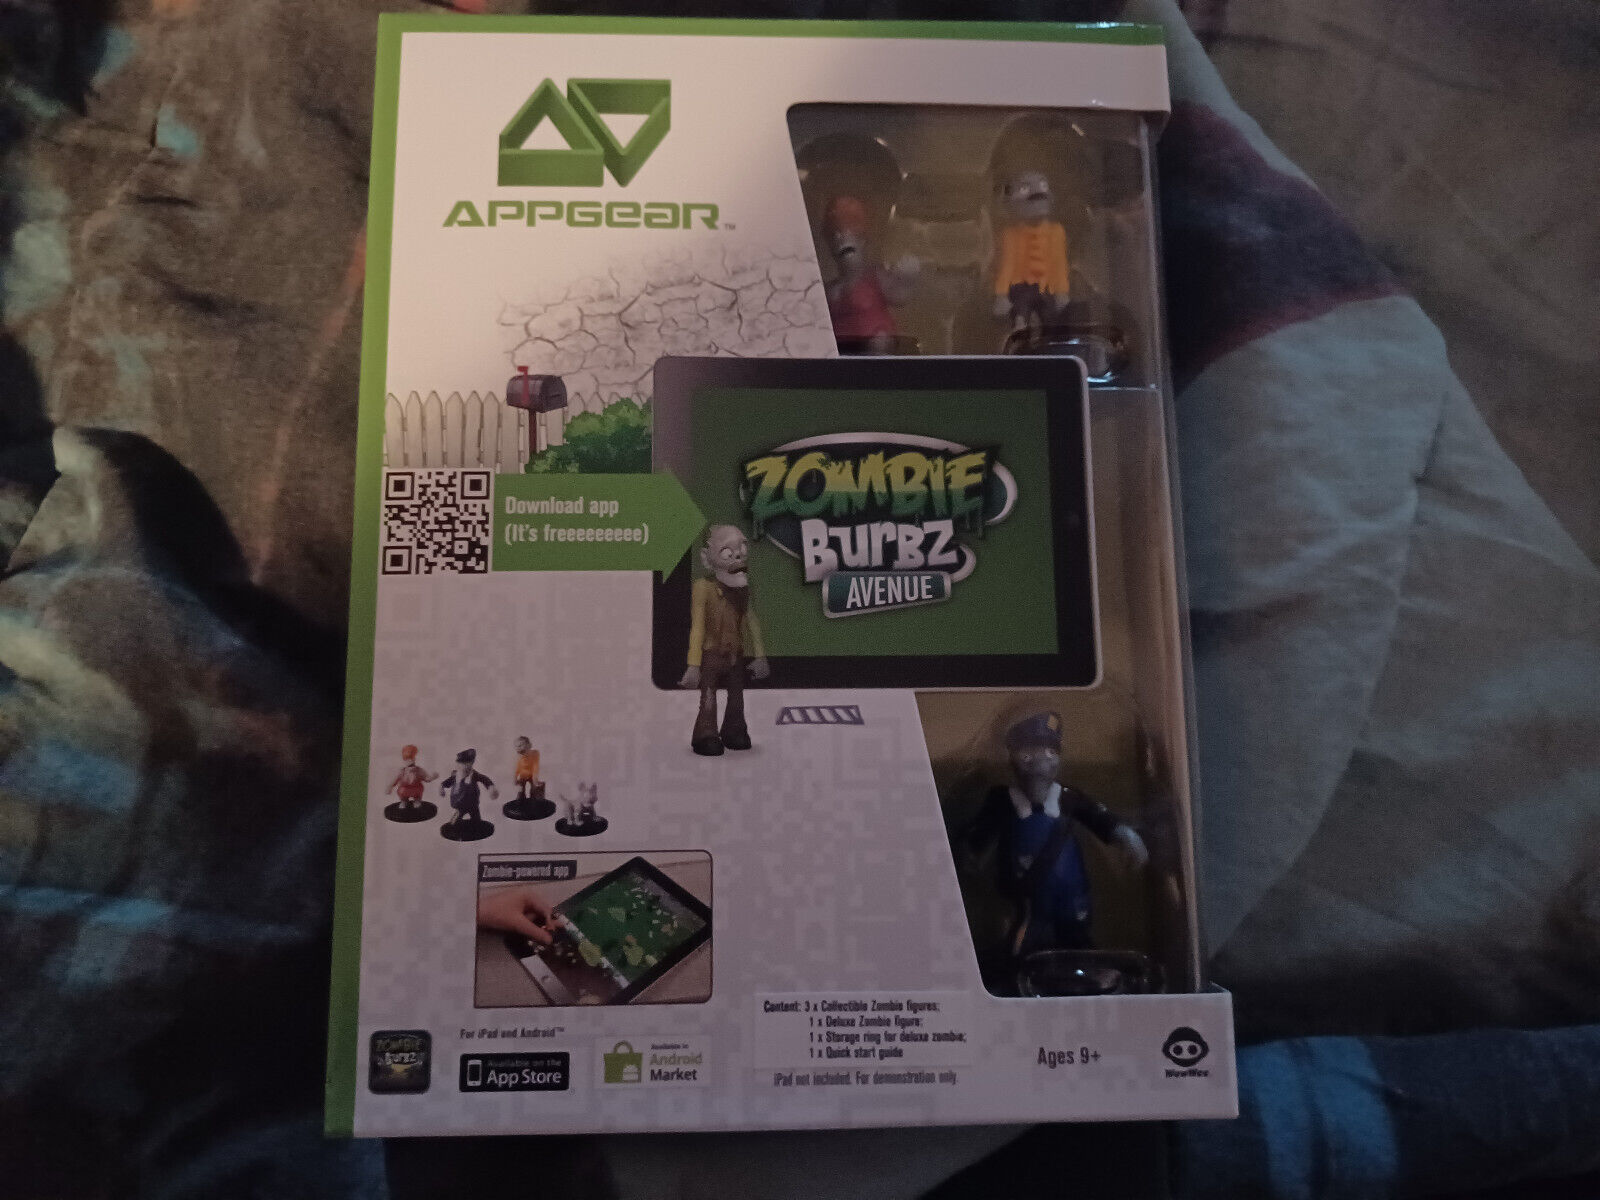 NEW 2011 APPGEAR Zombie Burbz Avenue Amplified Reality Game iOS iPad Android